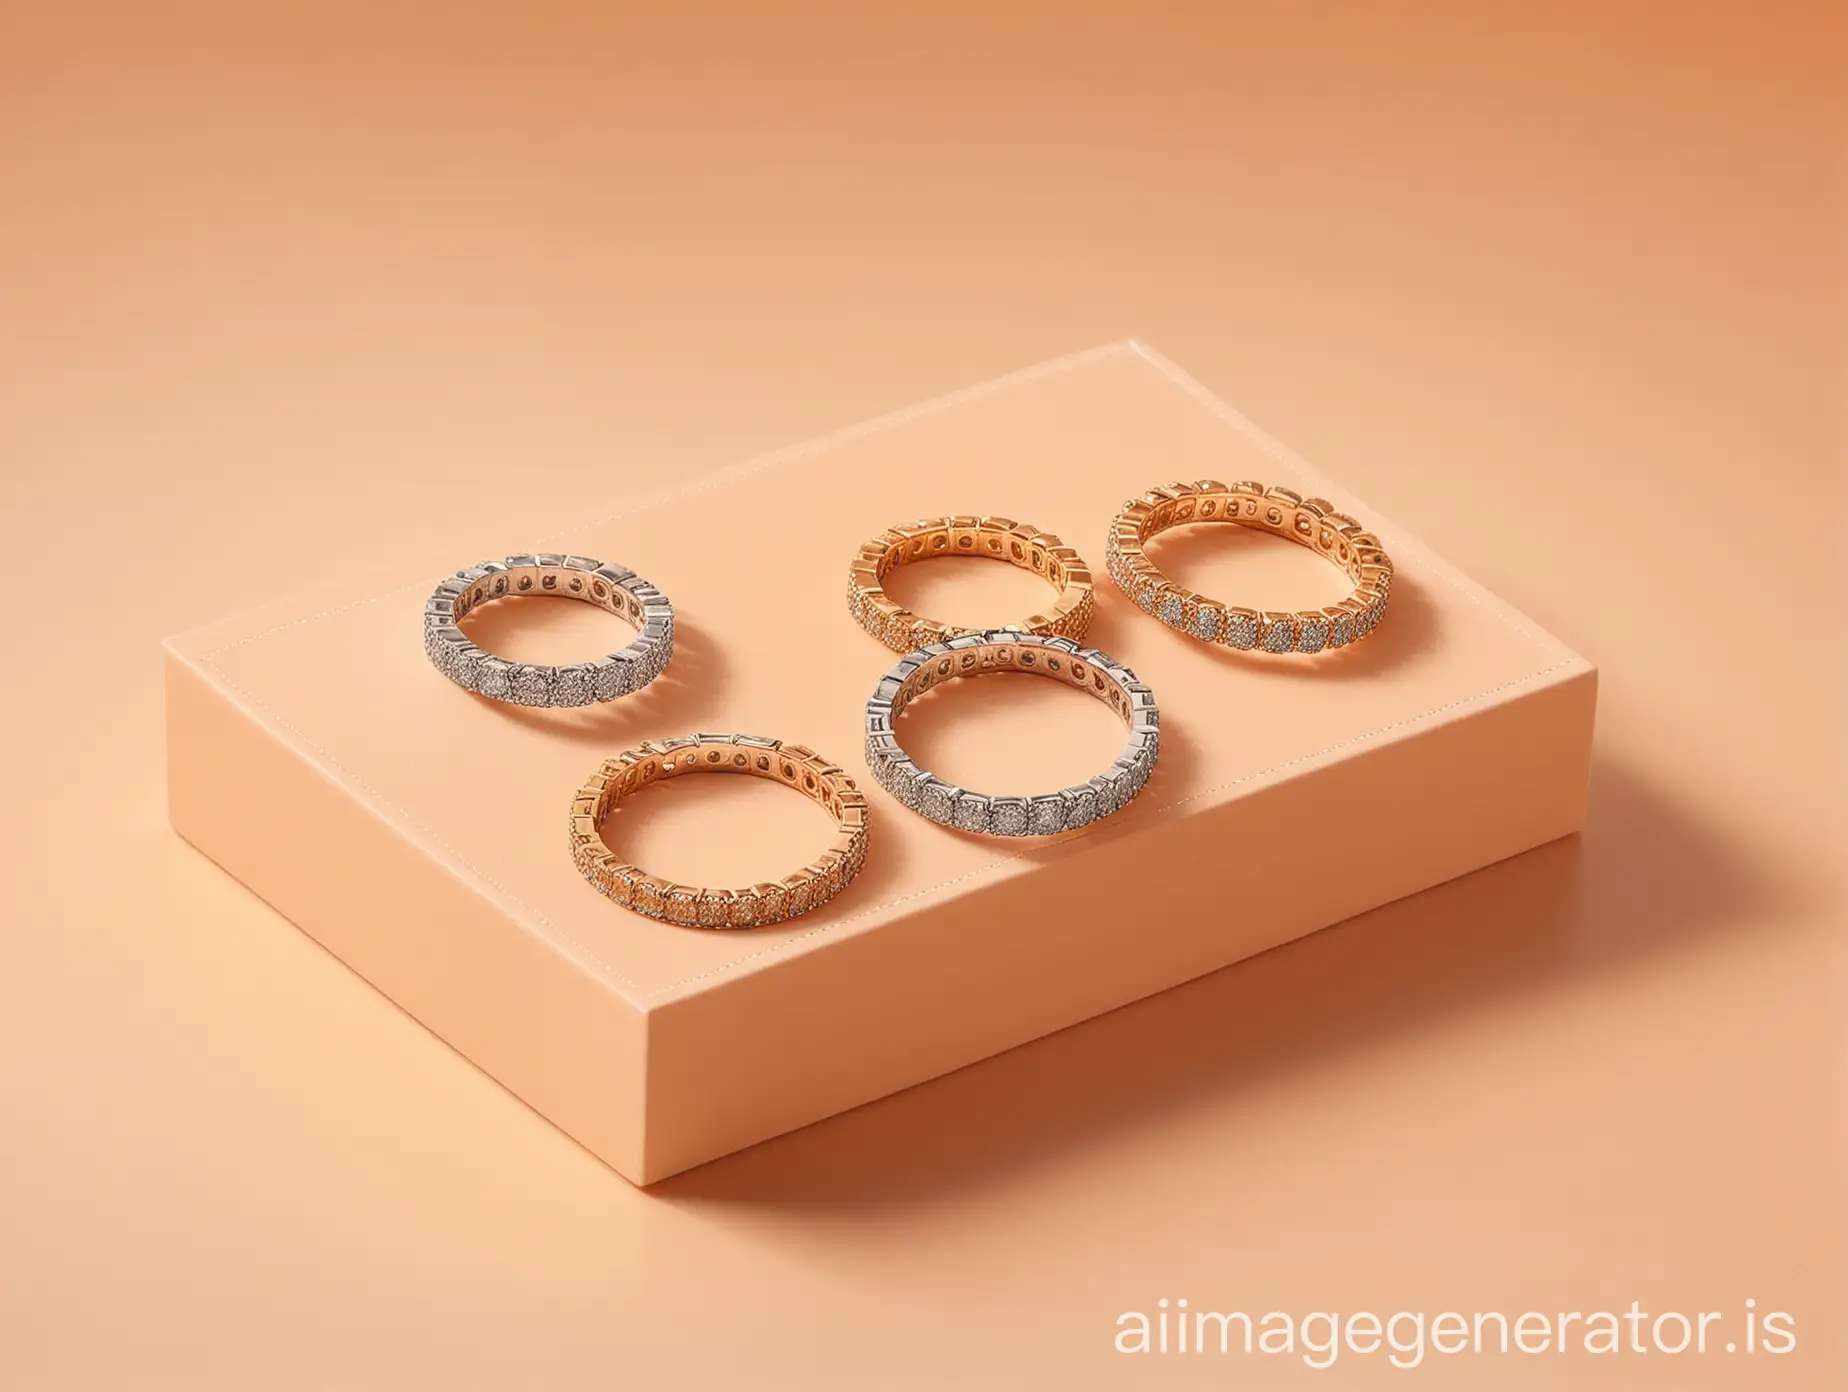 give me Diamond Eternity Band Collection on Light Orange Gradient Color Podium Box Object.